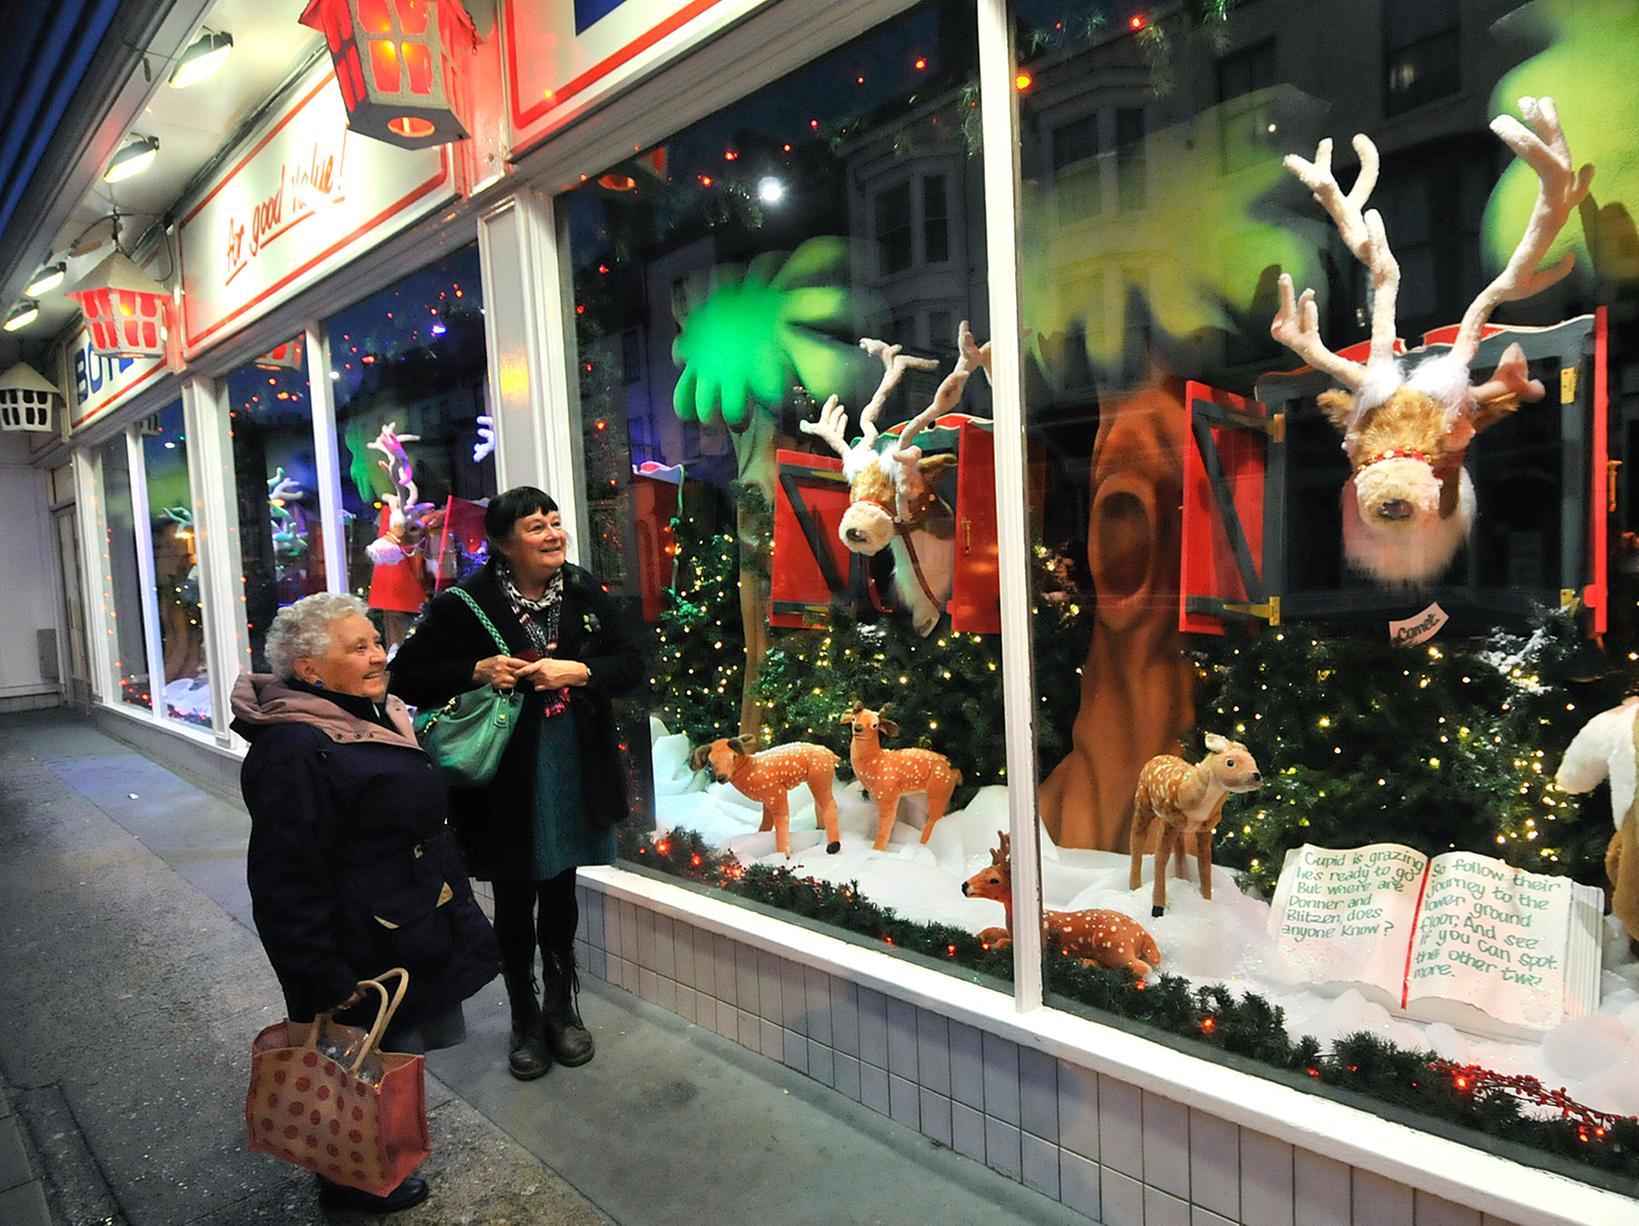 The Christmas display at Boyes is a long-standing tradition in the town.